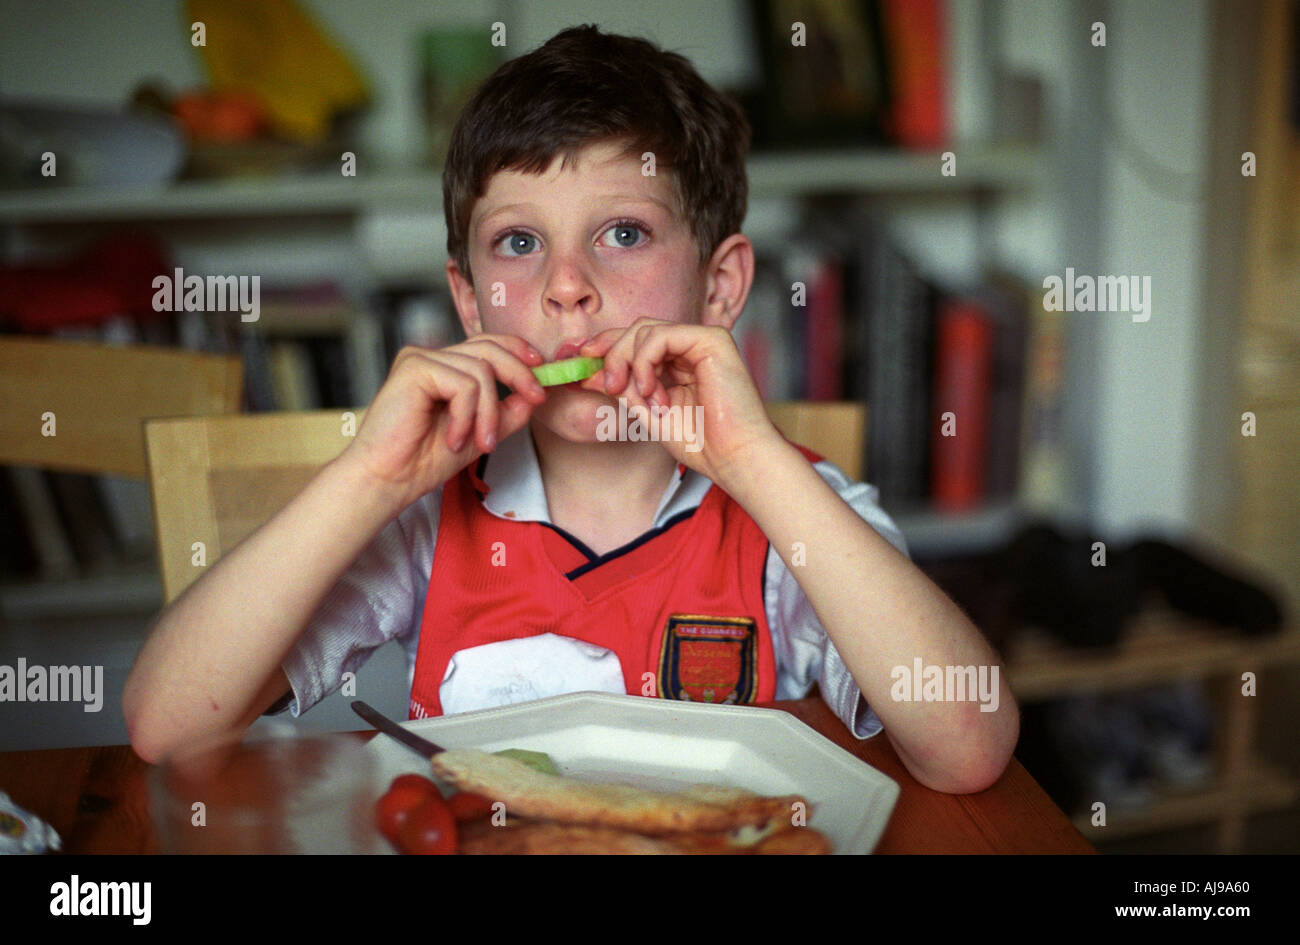 A Young Boy Eating Pizza And Salad At Home Wearing An Old Arsenal Stock Photo 1219167 Alamy